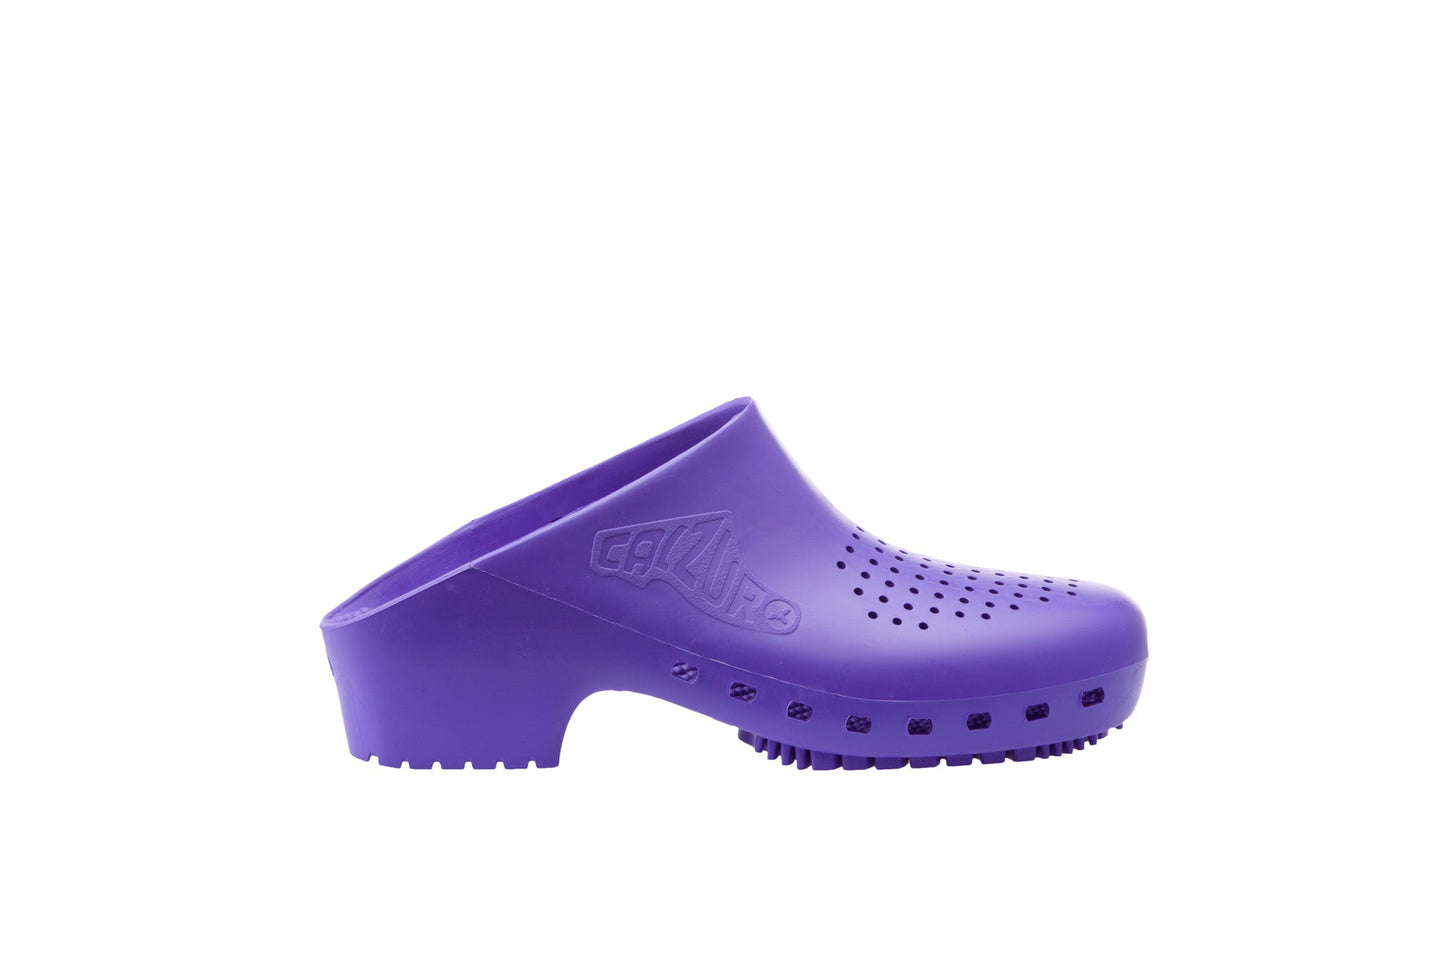 Calzuro Classic clogs with Upper Holes - Purple